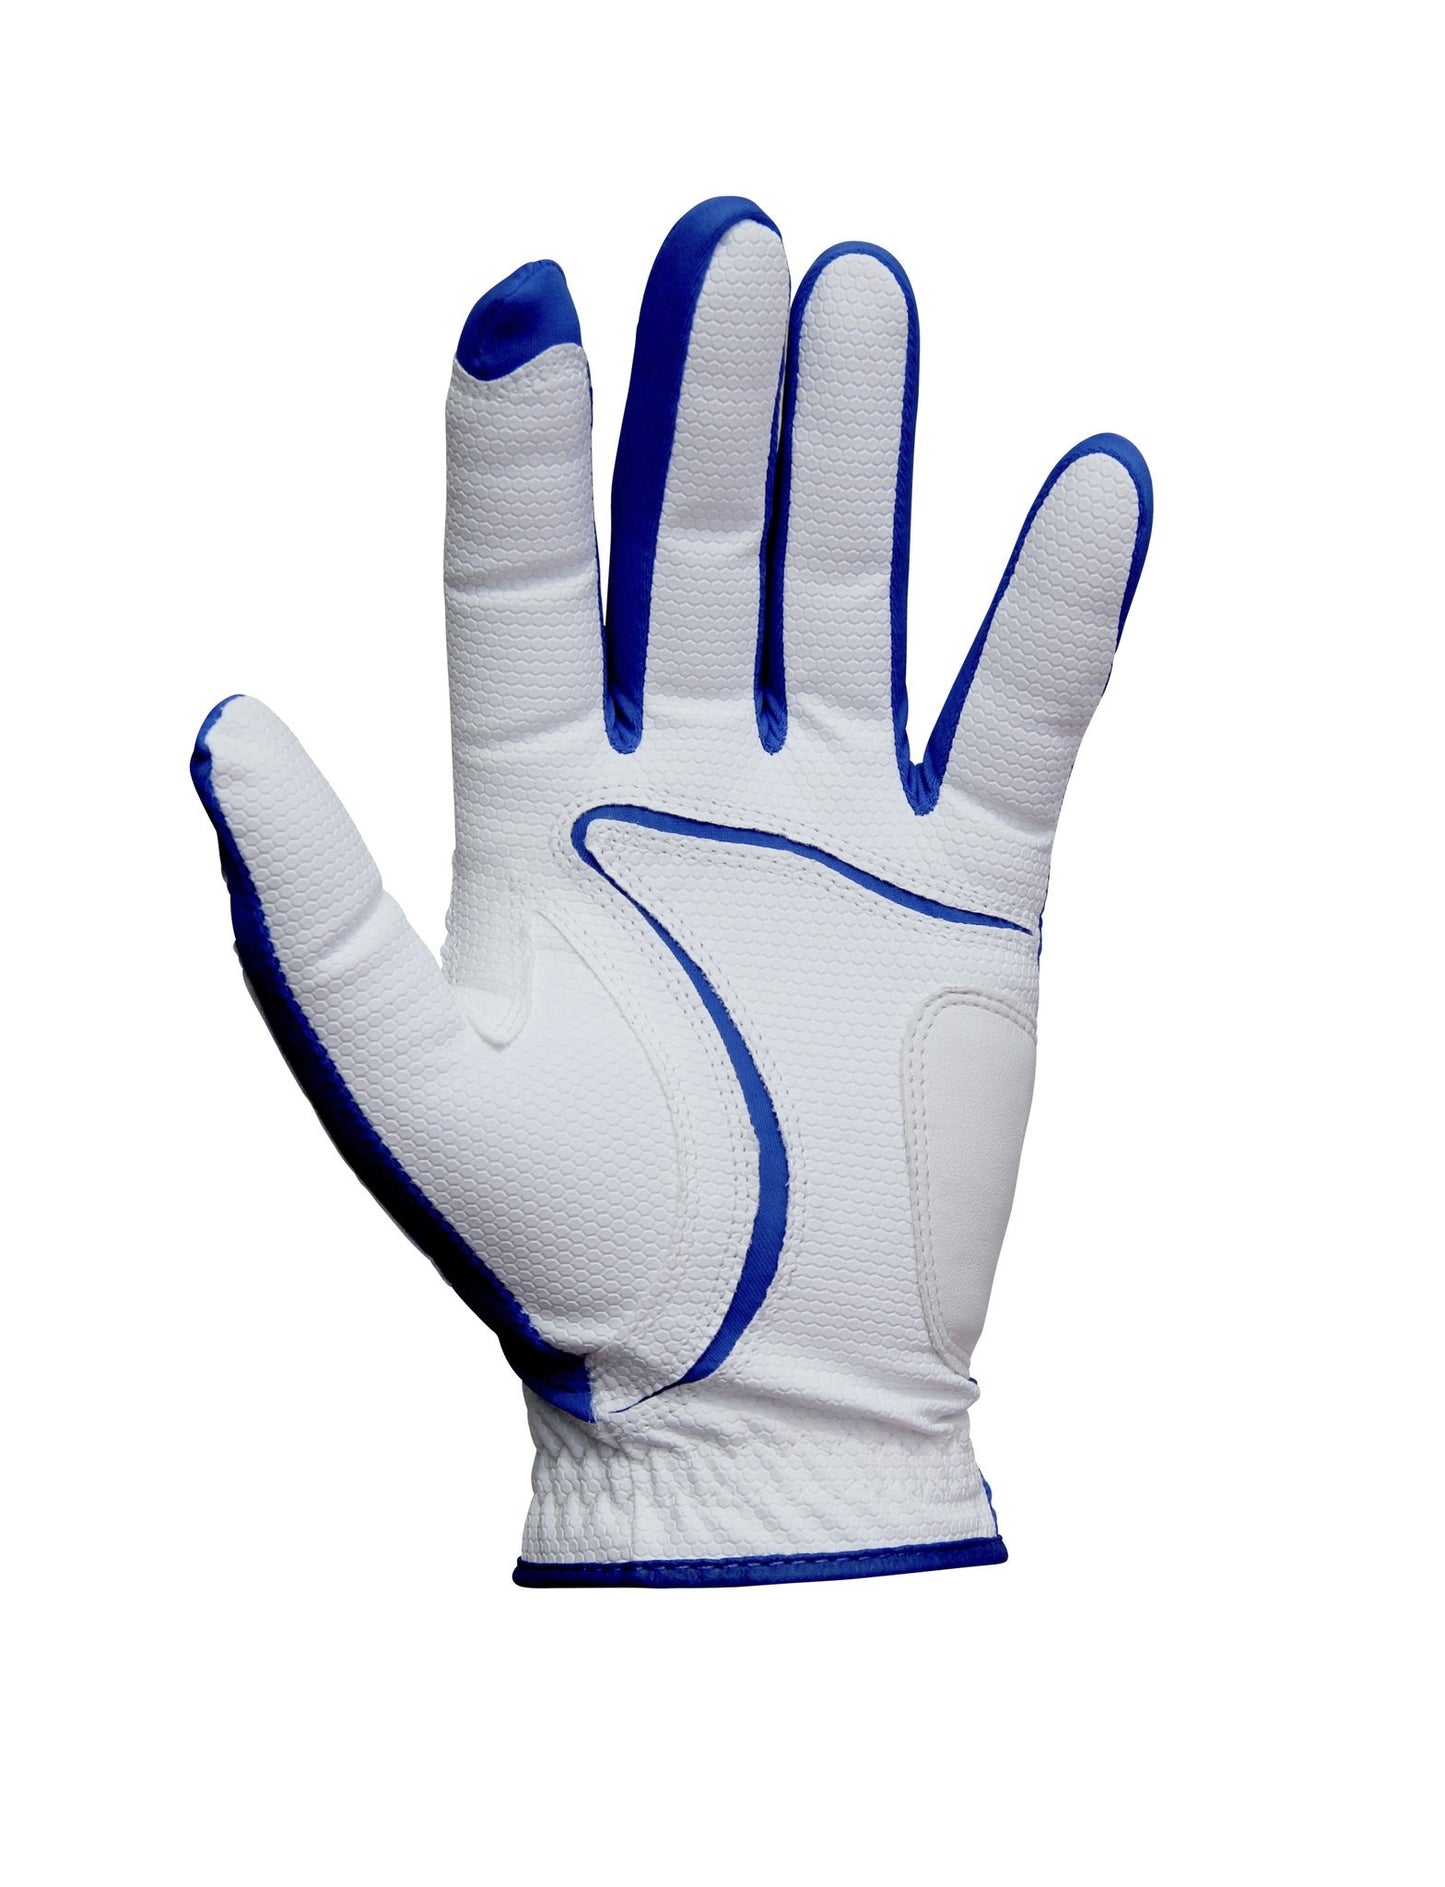 Copper Infused Golf Glove White/Royal Blue